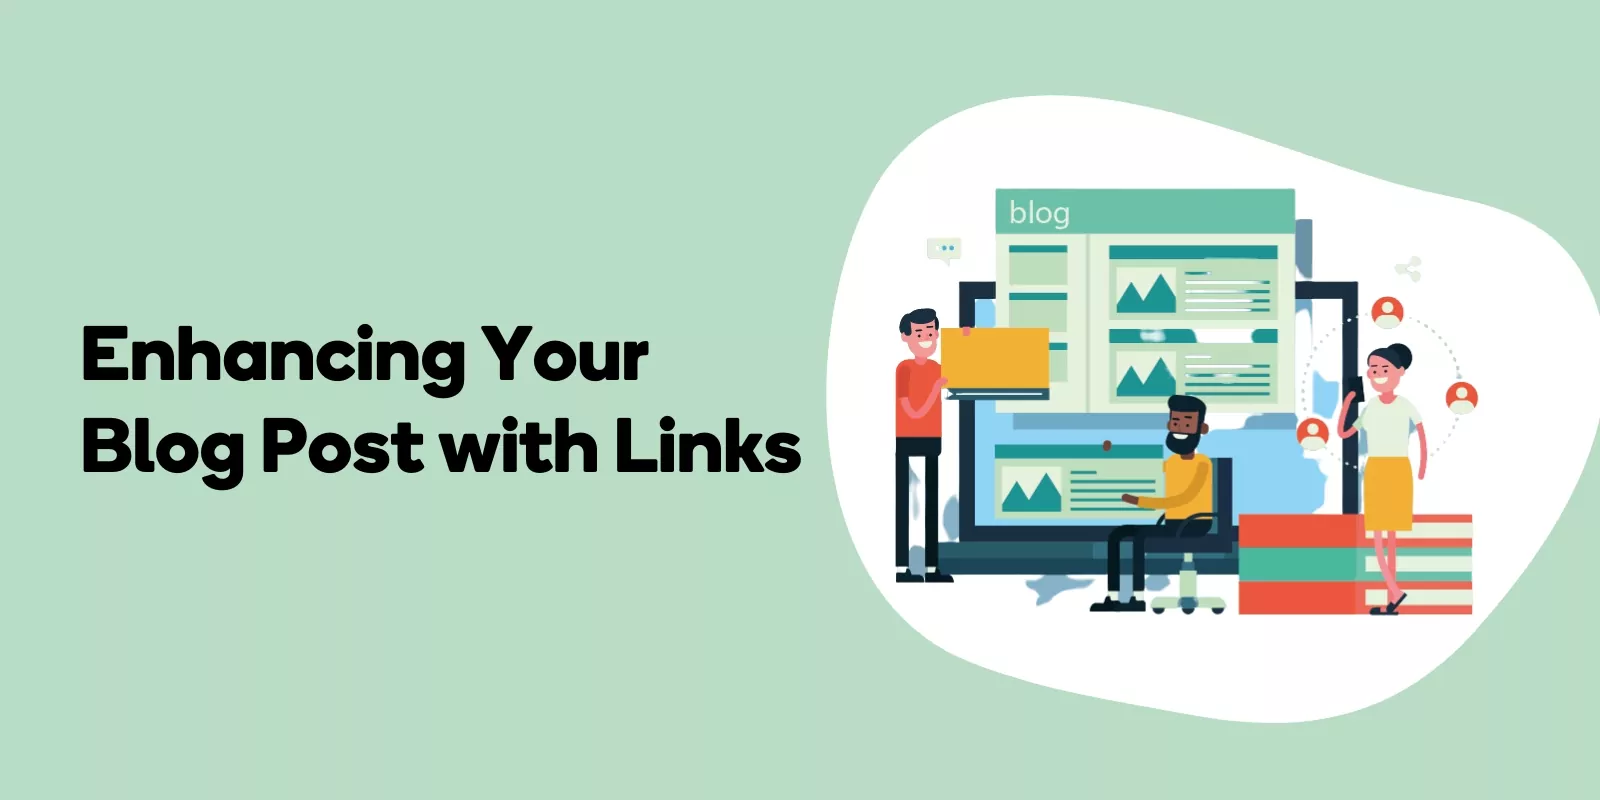 Enhancing Your Blog Post with Links